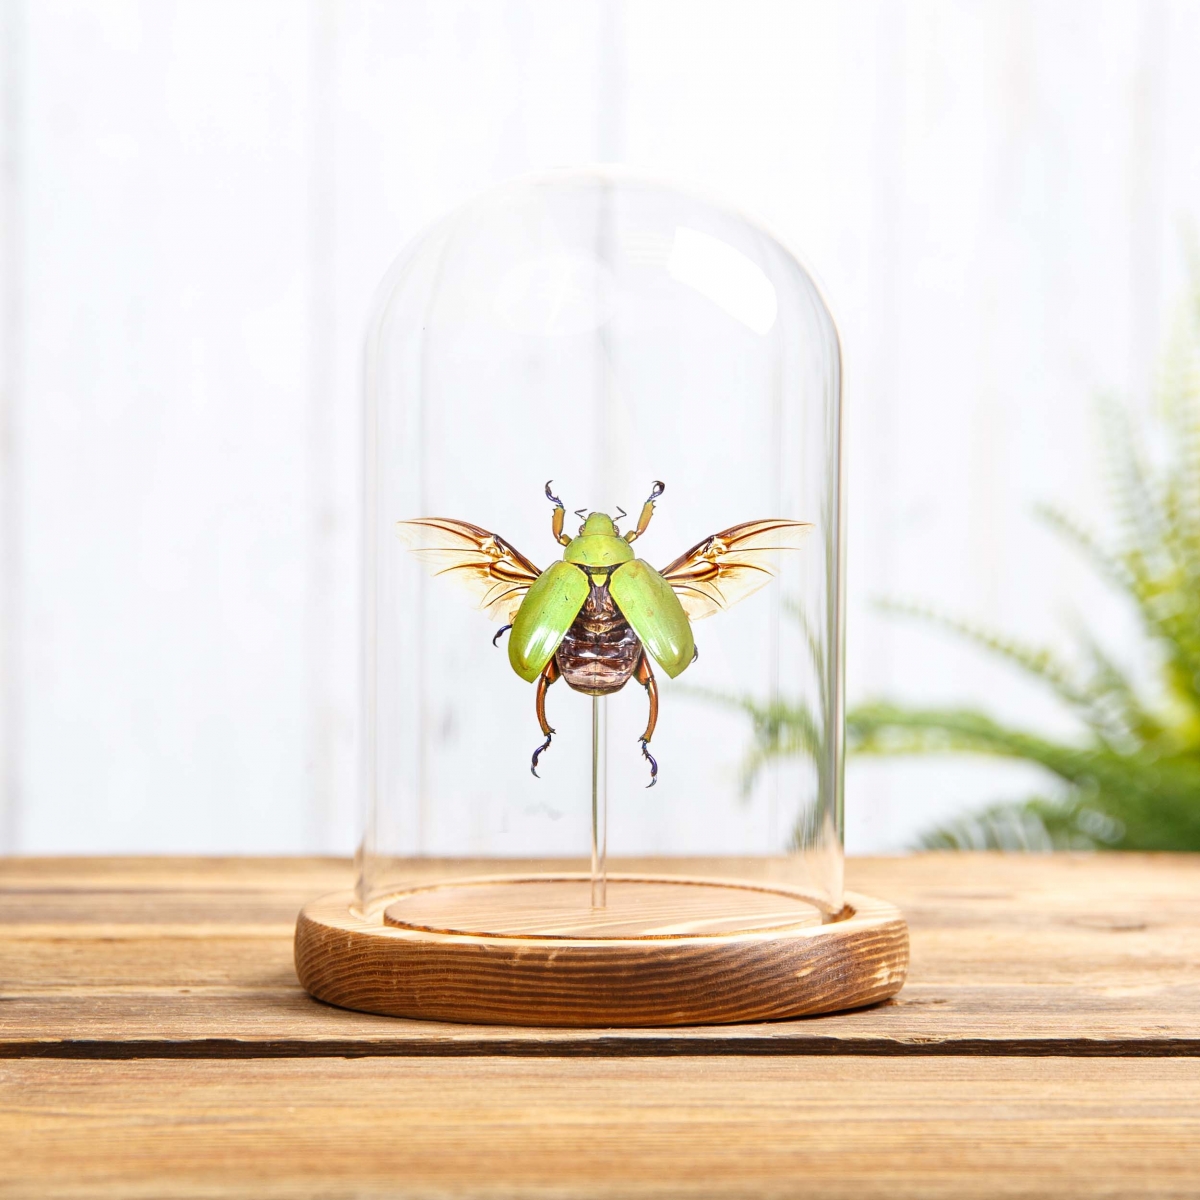 Ruteline Scarab Beetle in Glass Dome with Wooden Base (Chrysina adolphi)